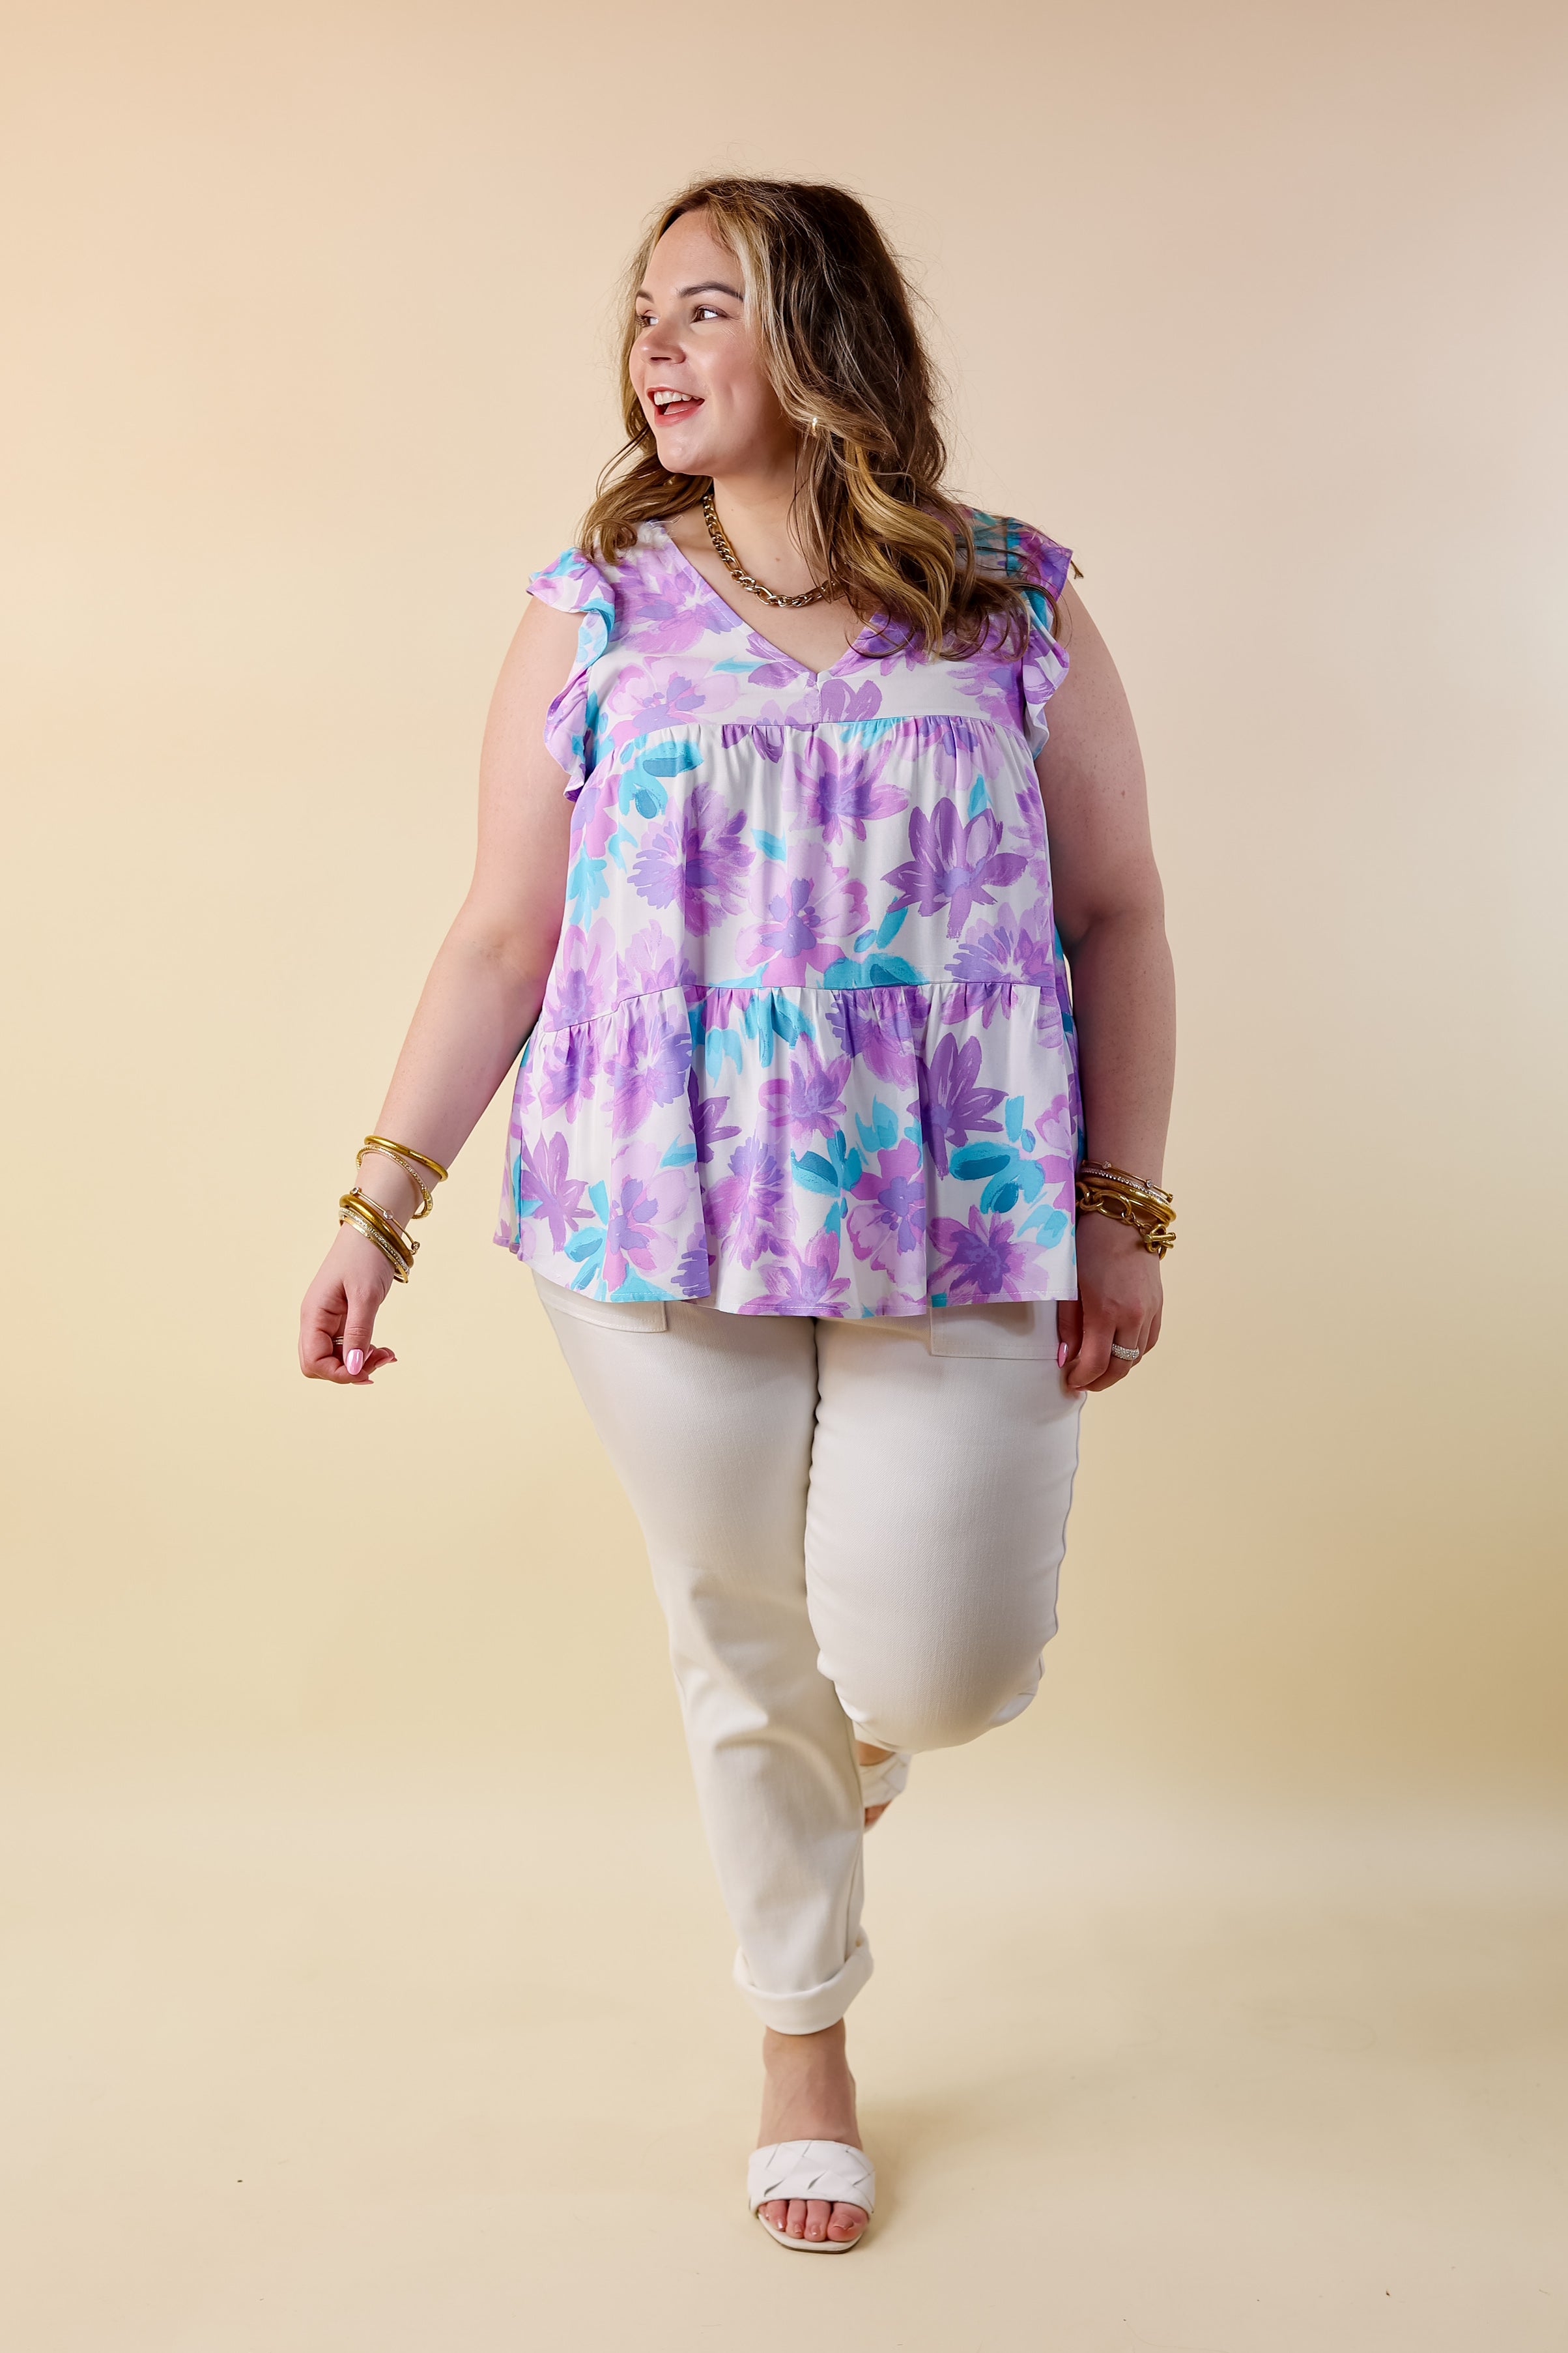 Inspiring Sights Floral V Neck Top with Ruffle Cap Sleeves in Lavender Purple - Giddy Up Glamour Boutique